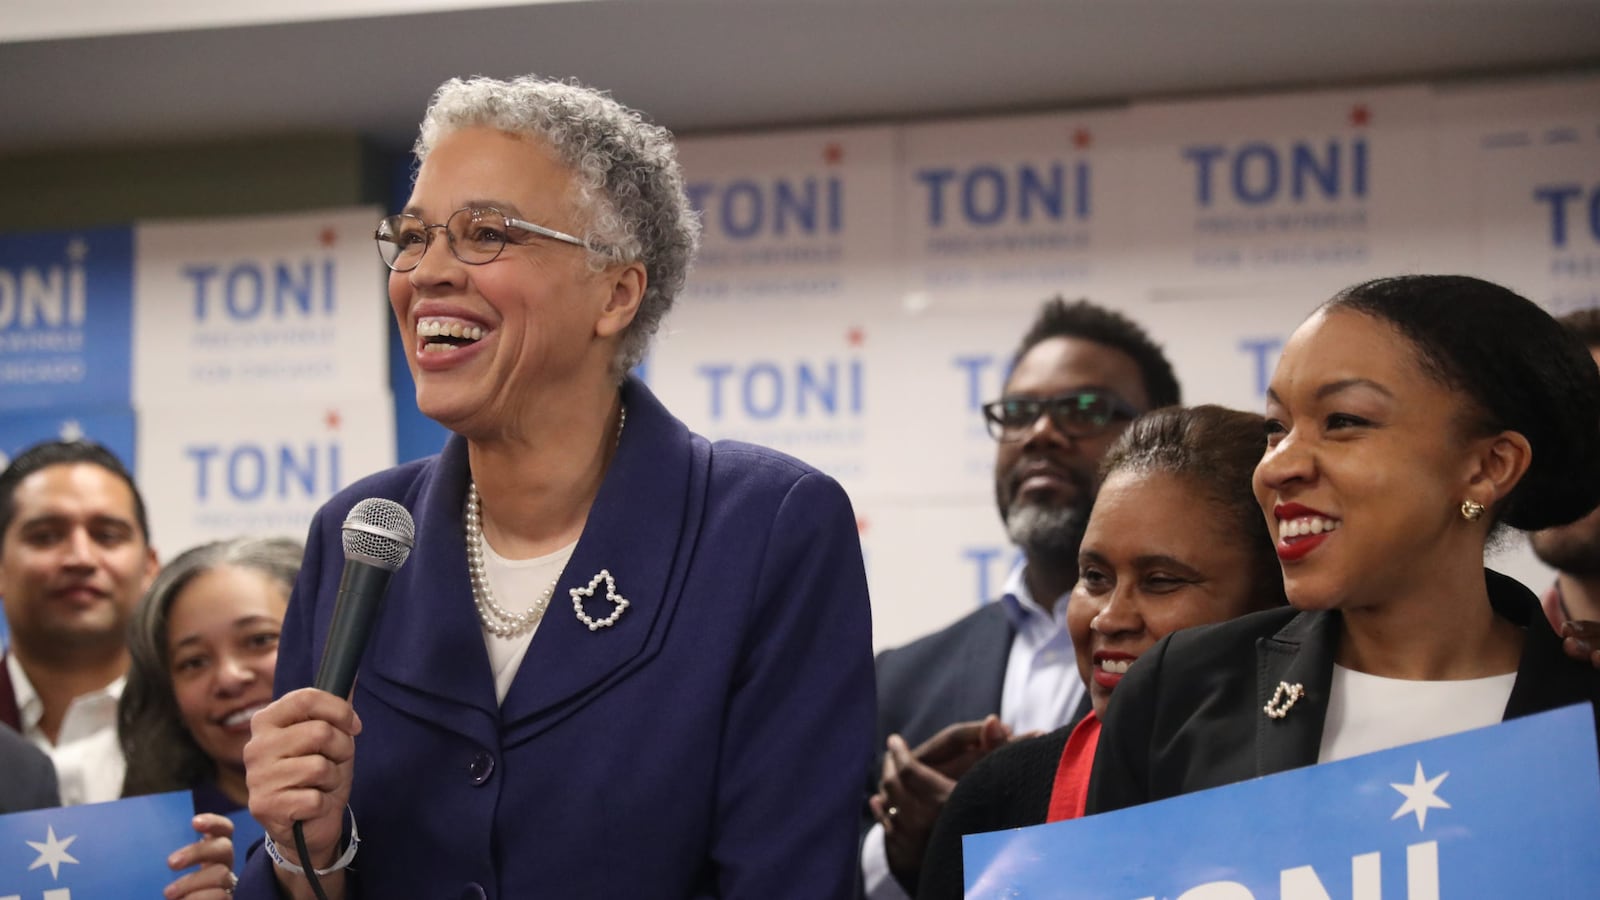 Mayoral candidate Toni Preckwinkle appears with supporters Tuesday night, Feb. 26, 2019 at the Lake Shore Cafe in Chicago. (Chris Sweda/Chicago Tribune/TNS via Getty Images)